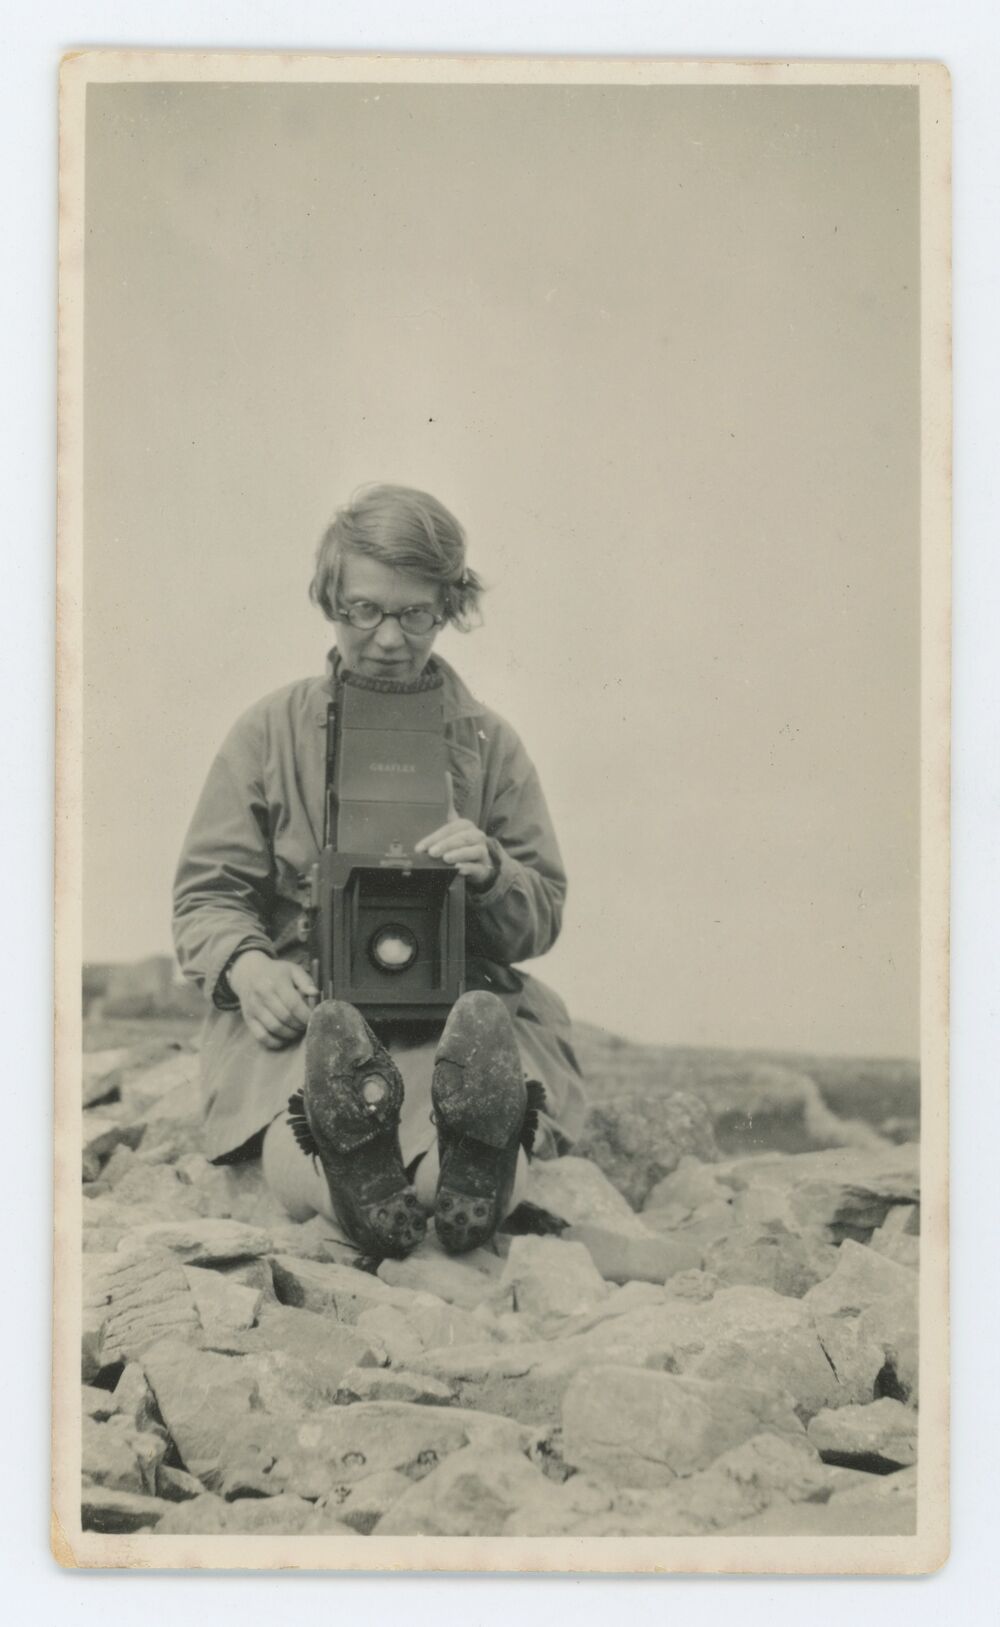 A sepia photo of a woman sitting on rocky ground. She holds a large camera and the soles of her boots face the viewer.